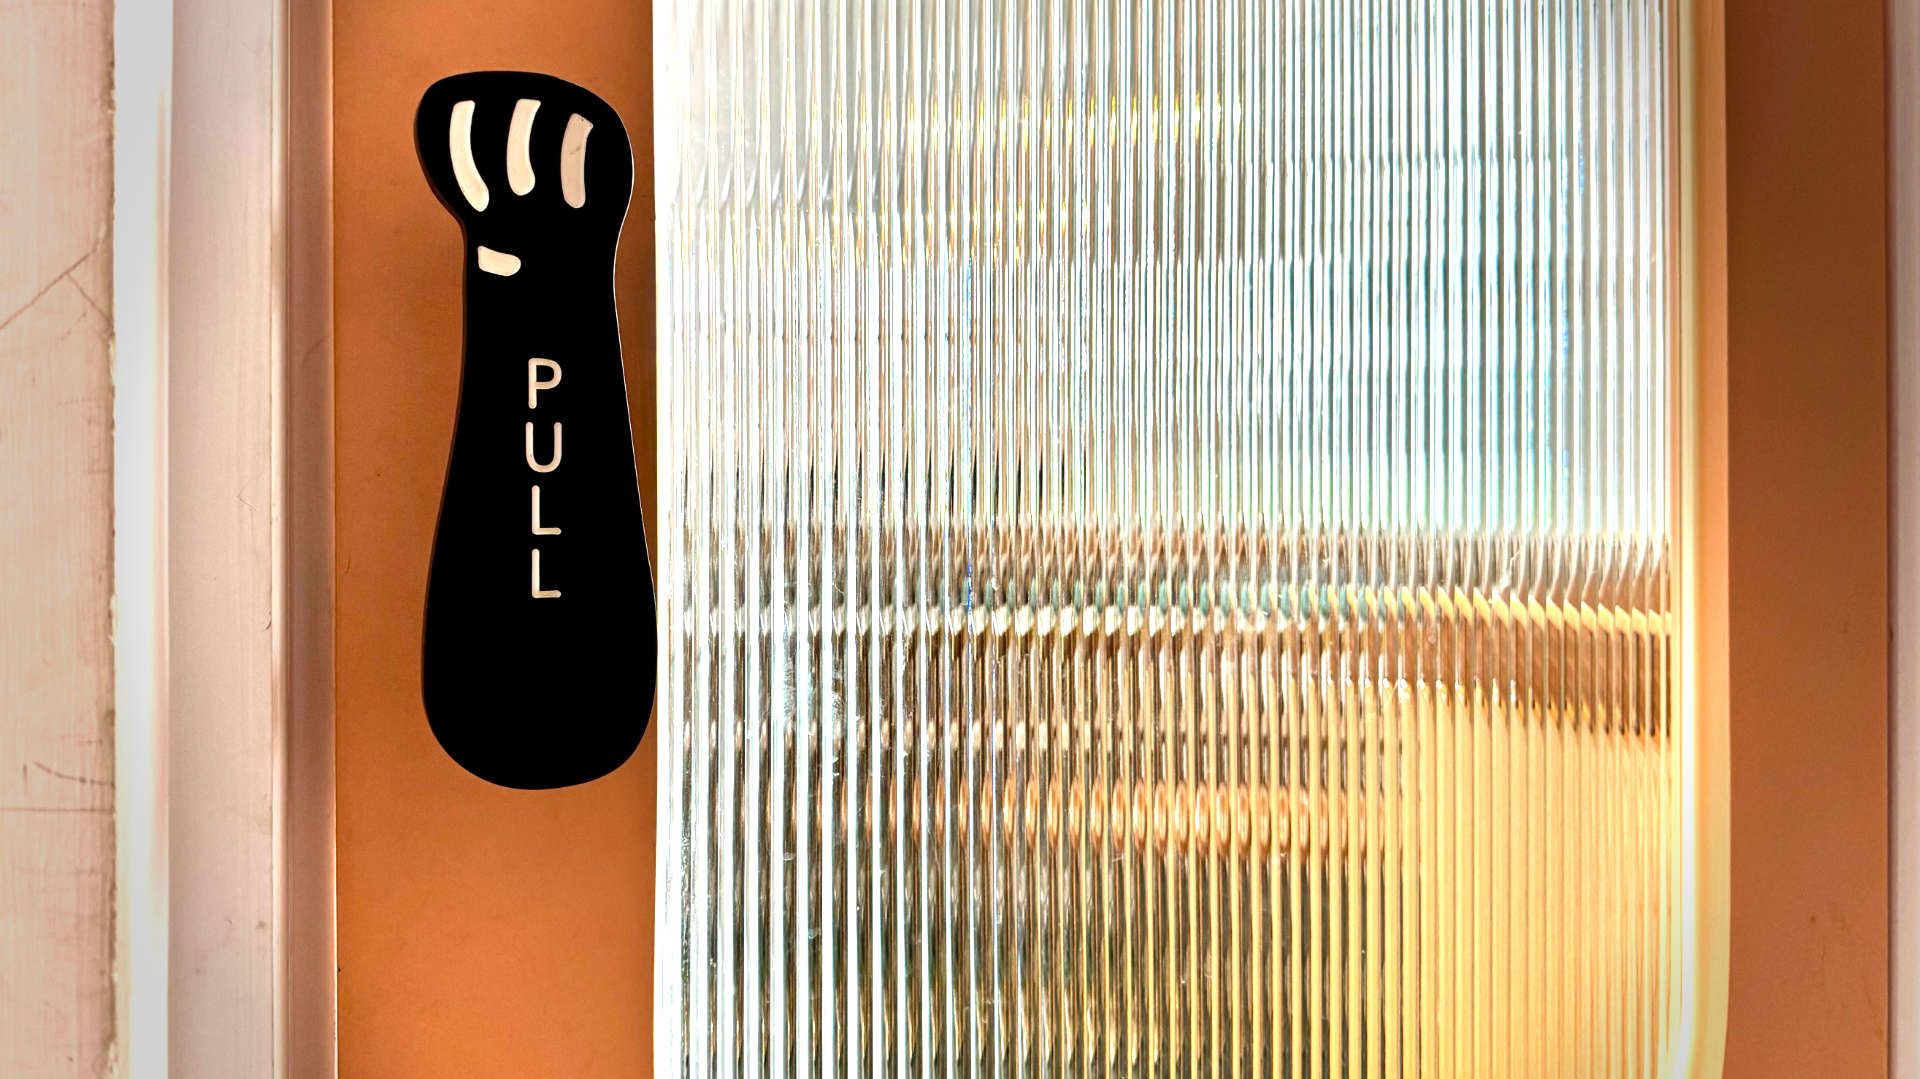 An opaque glass door with a door handle in the shape of a cat leg and paw. The door handle says “pull”.